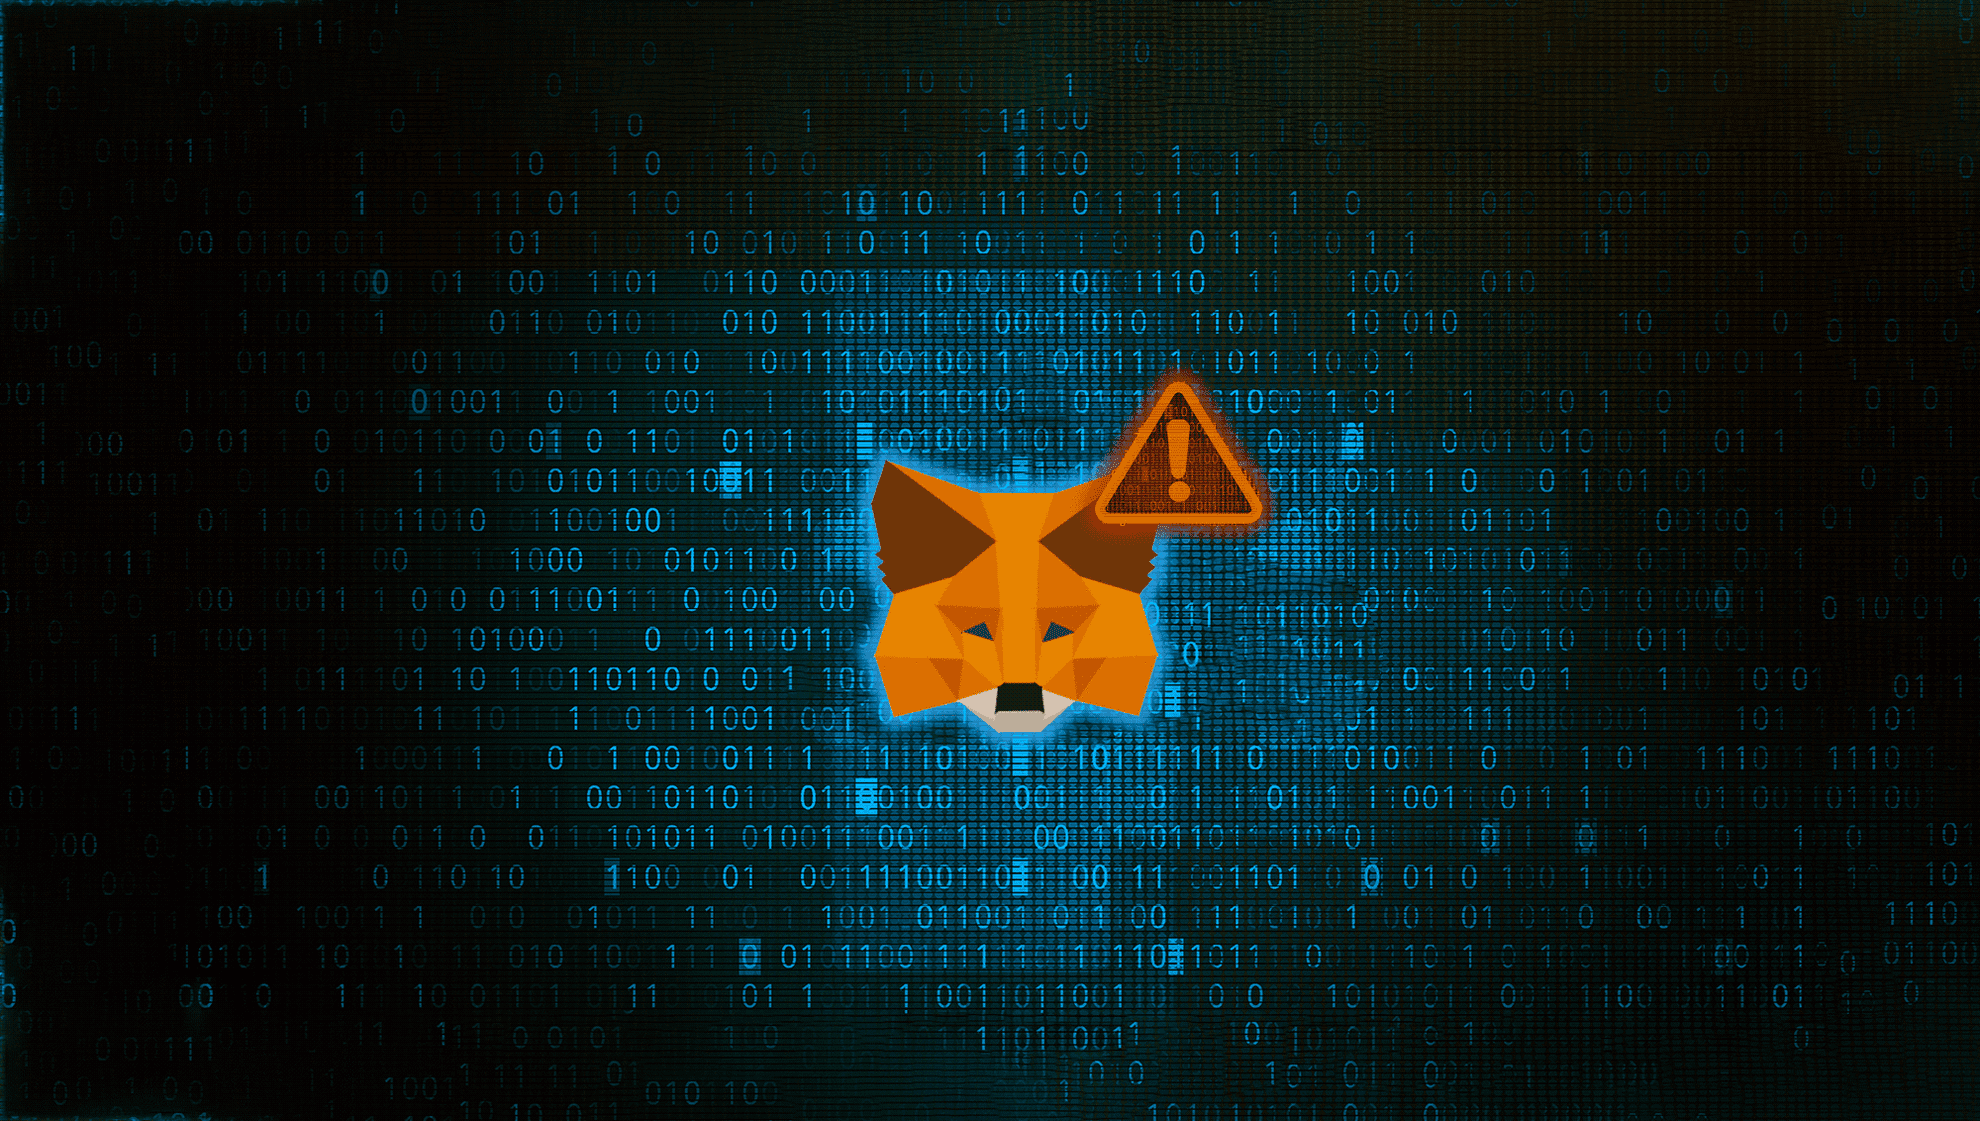 User data are reliably protected from hacker attacks with MetaMask security.